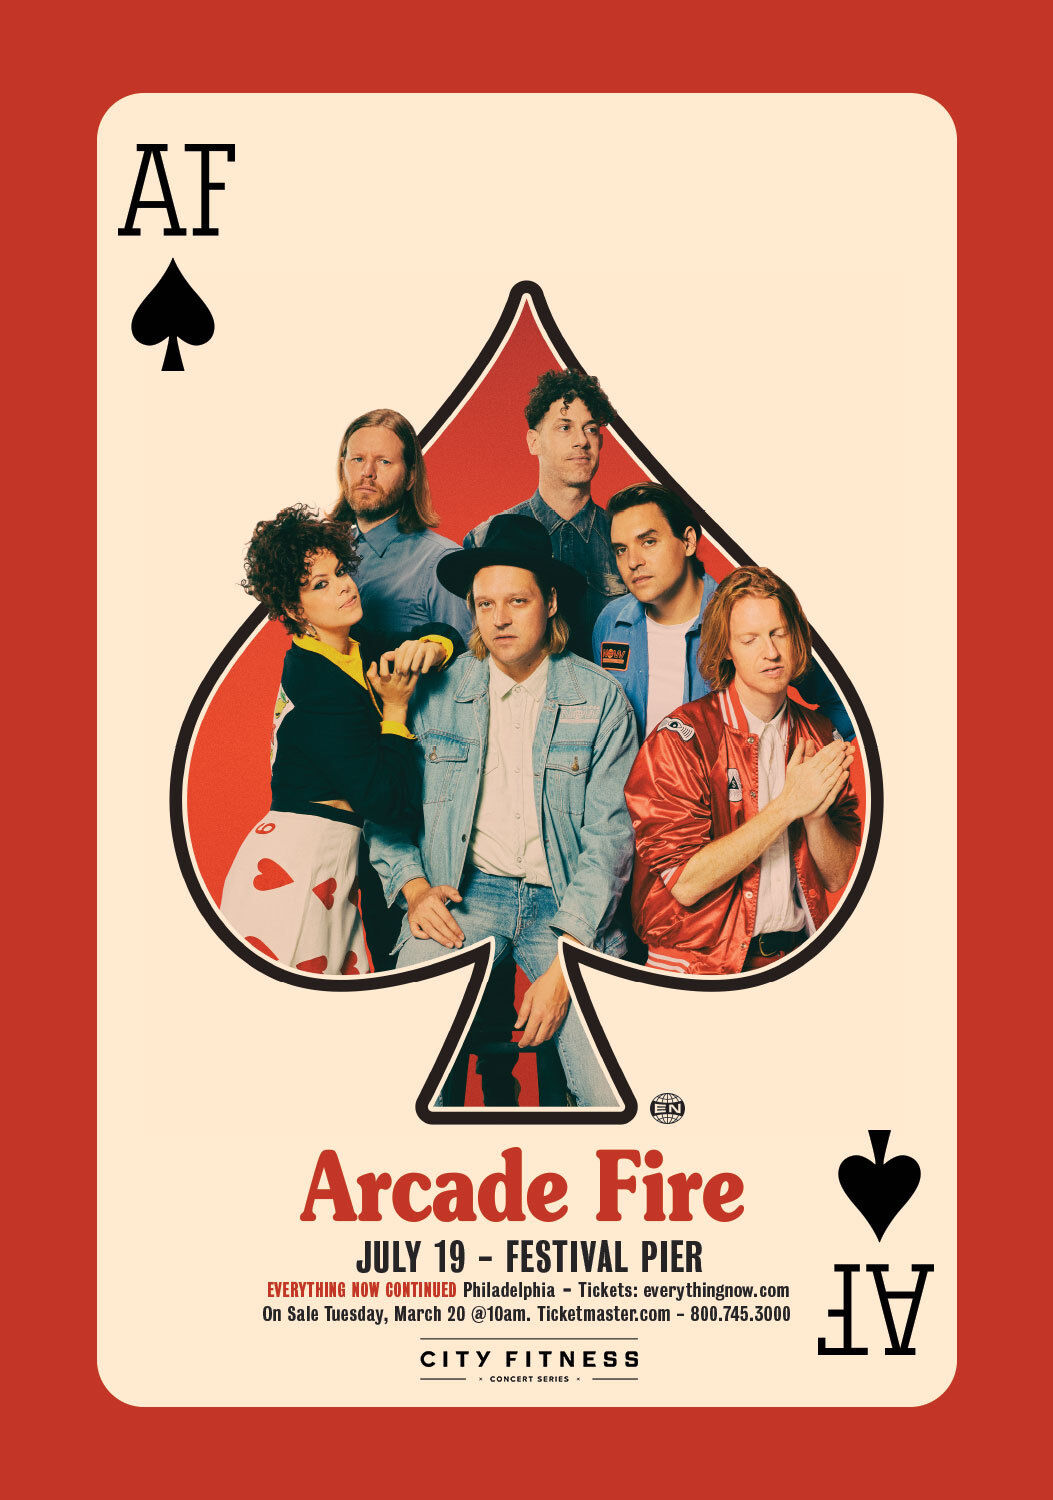 Arcade Fire "everything Now Continued" 2018 Philadelphia Concert Tour Poster